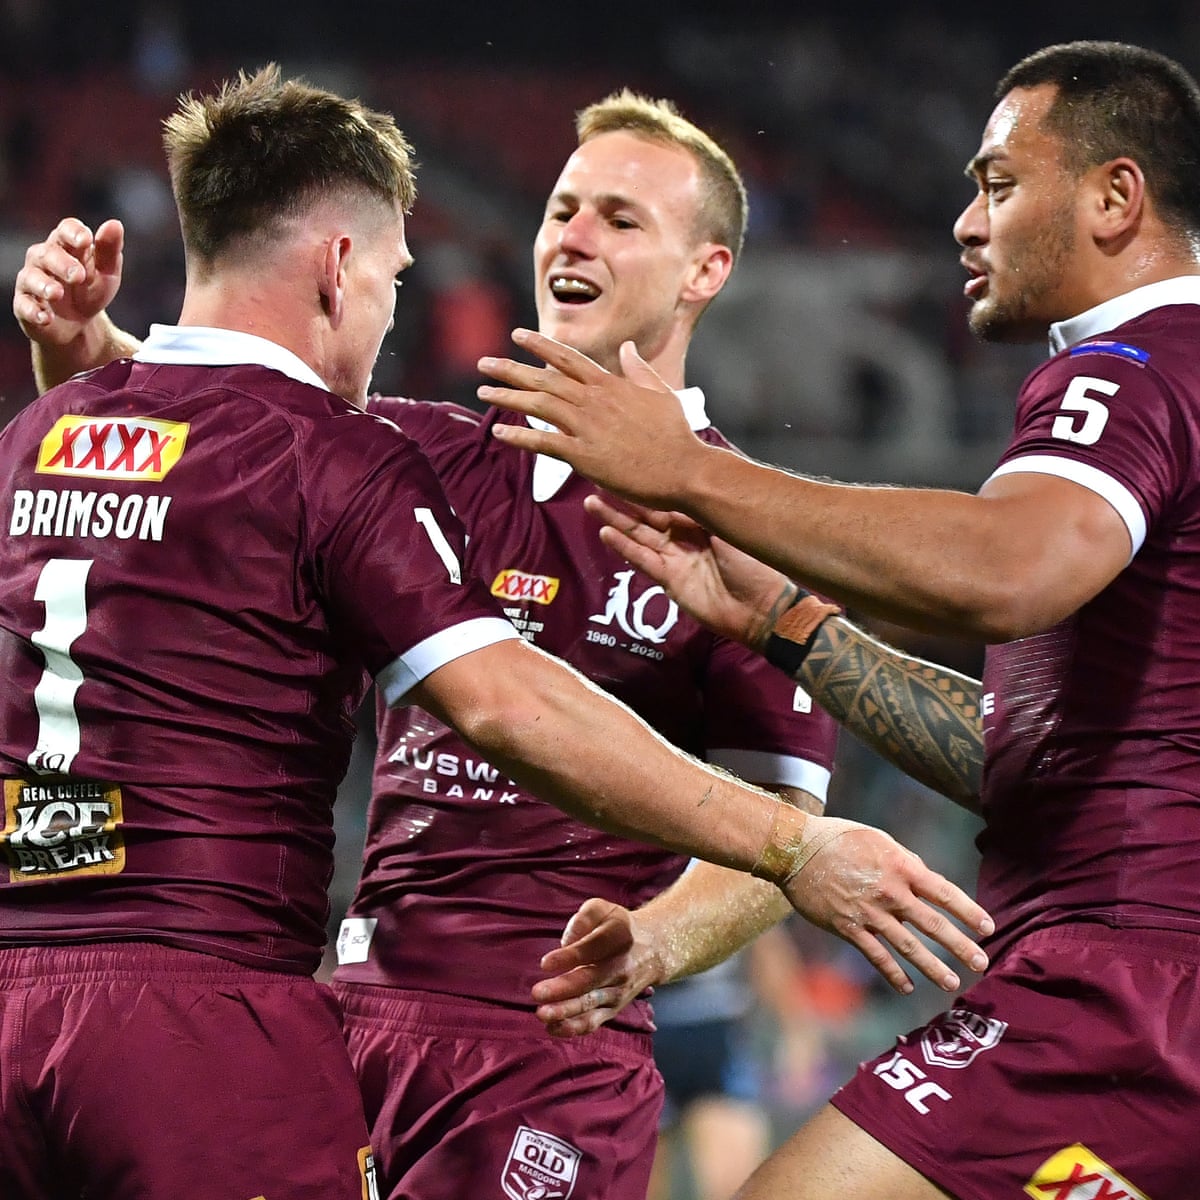 Get your hands on the highly-anticipated Origin qld game now!